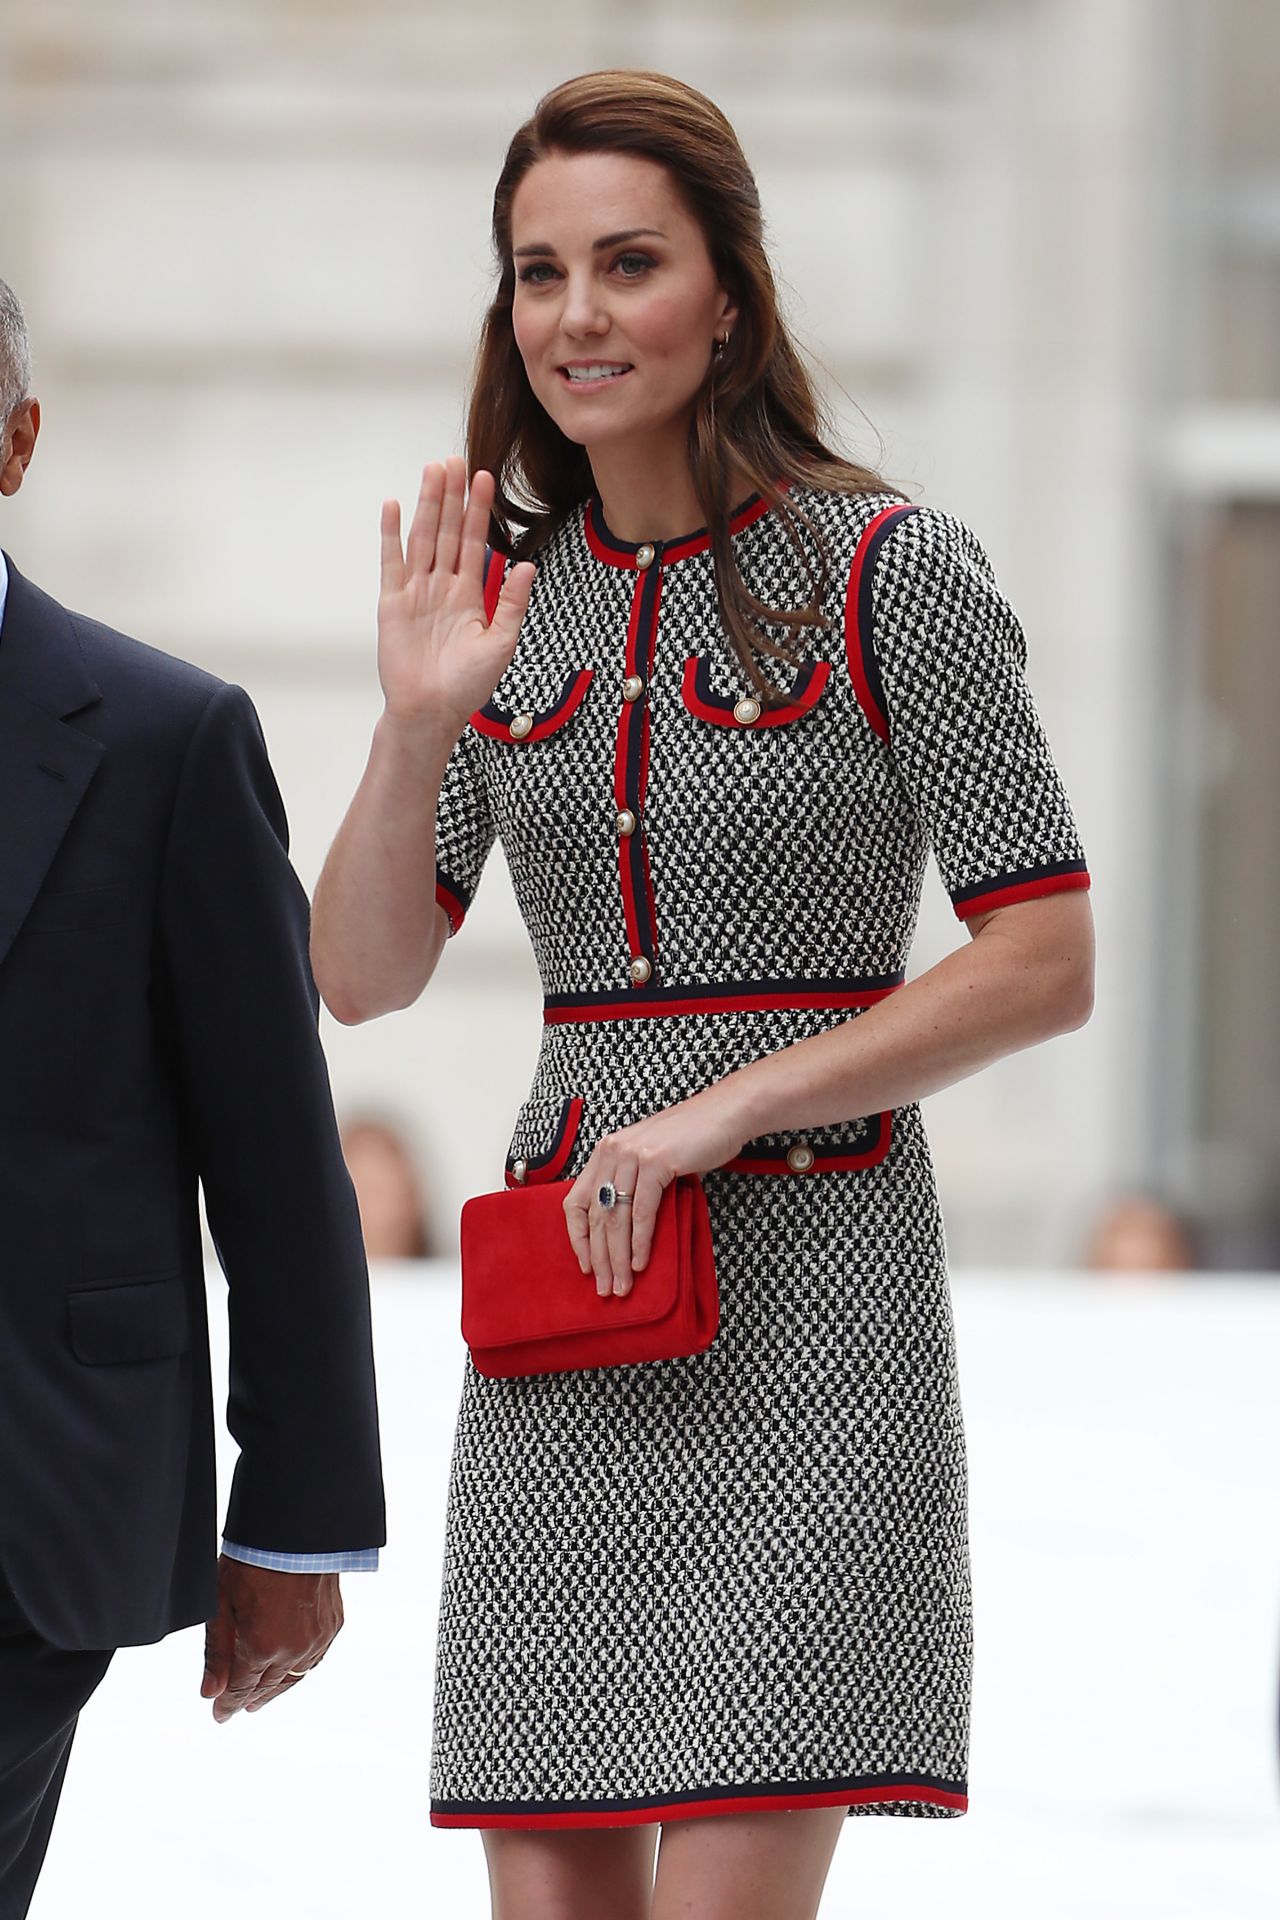 Kate Middleton - Victoria & Albert Museumin in London 06/29/20171280 x 1920